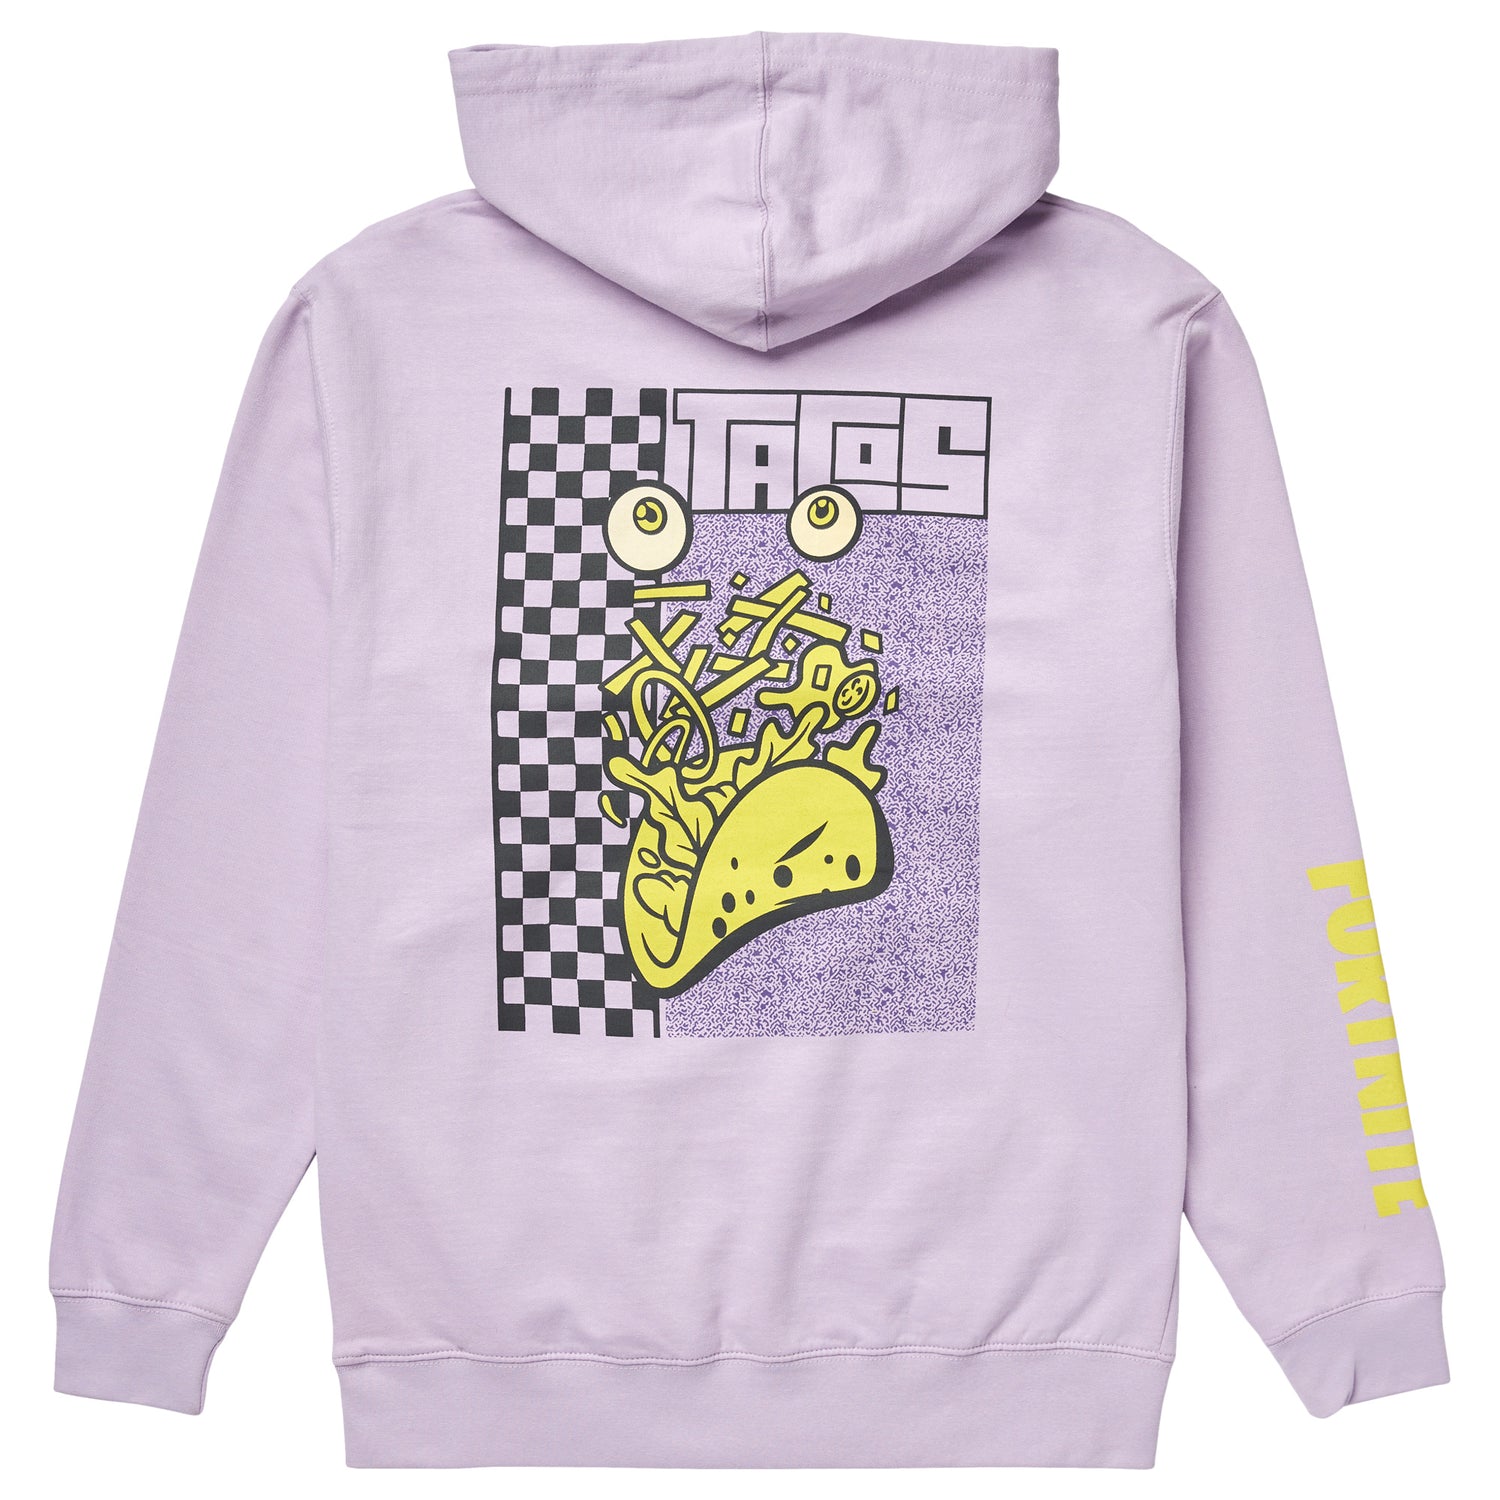 FORTNITE TACO TUESDAY PULLOVER HOODIE - LAVENDER